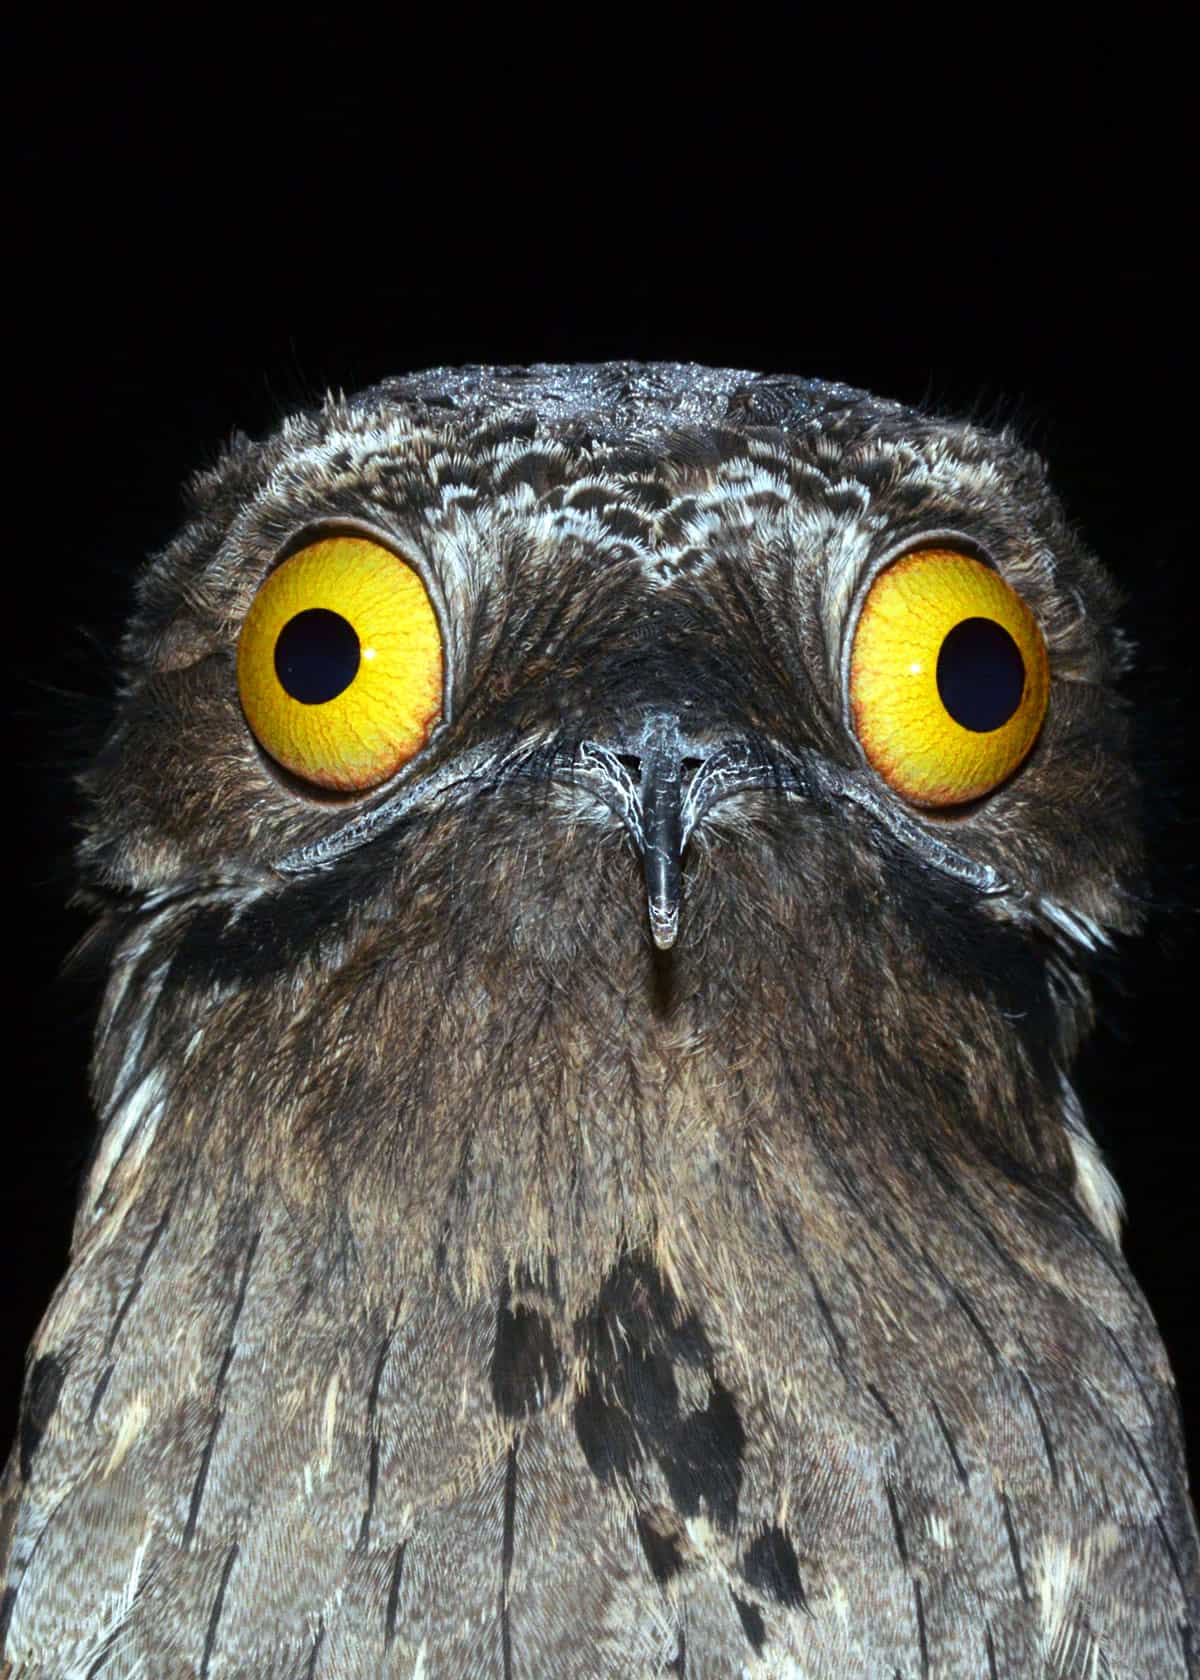 Potoo facts